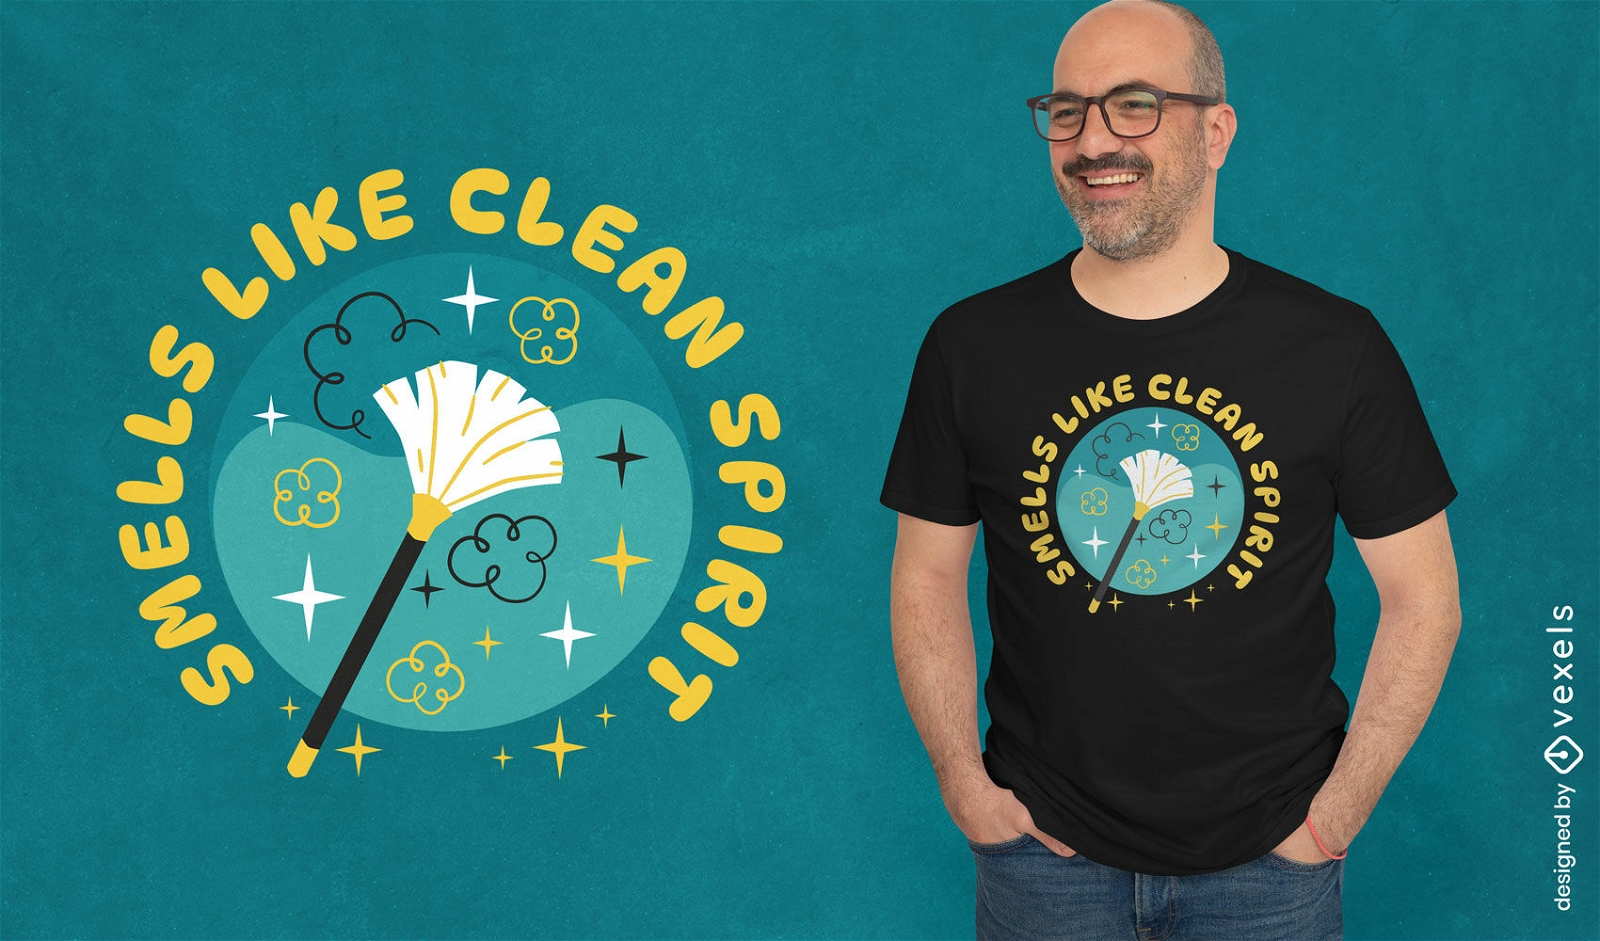 Cleaning inspired t-shirt design